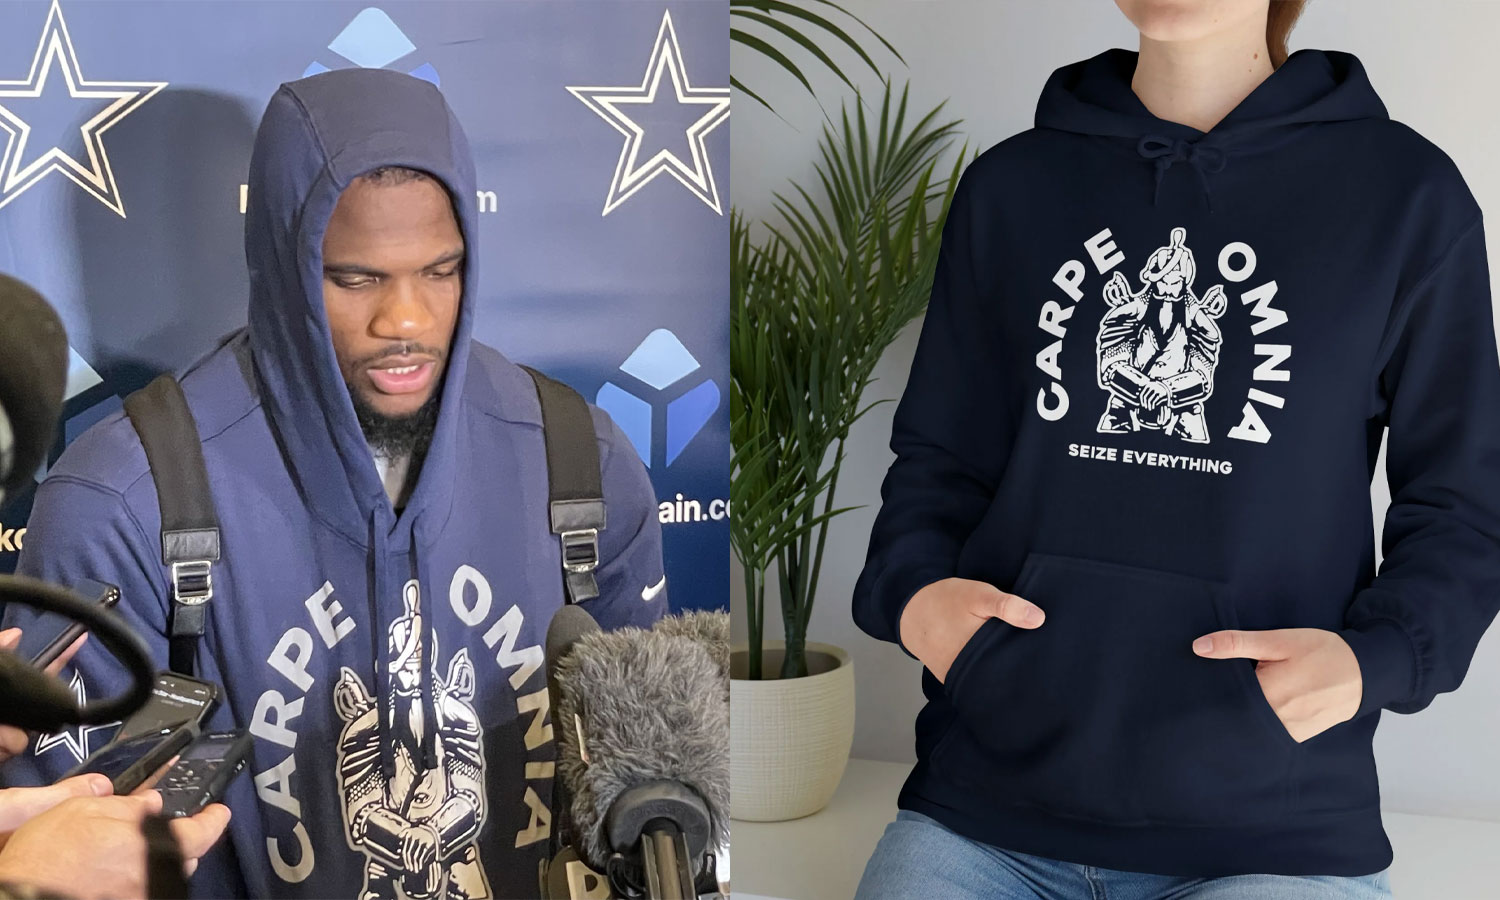 Get Your Cowboys 'Carpe Omnia: Seize Everything' Shirt and Join the 2023  Season's Rallying Cry - Rockatee